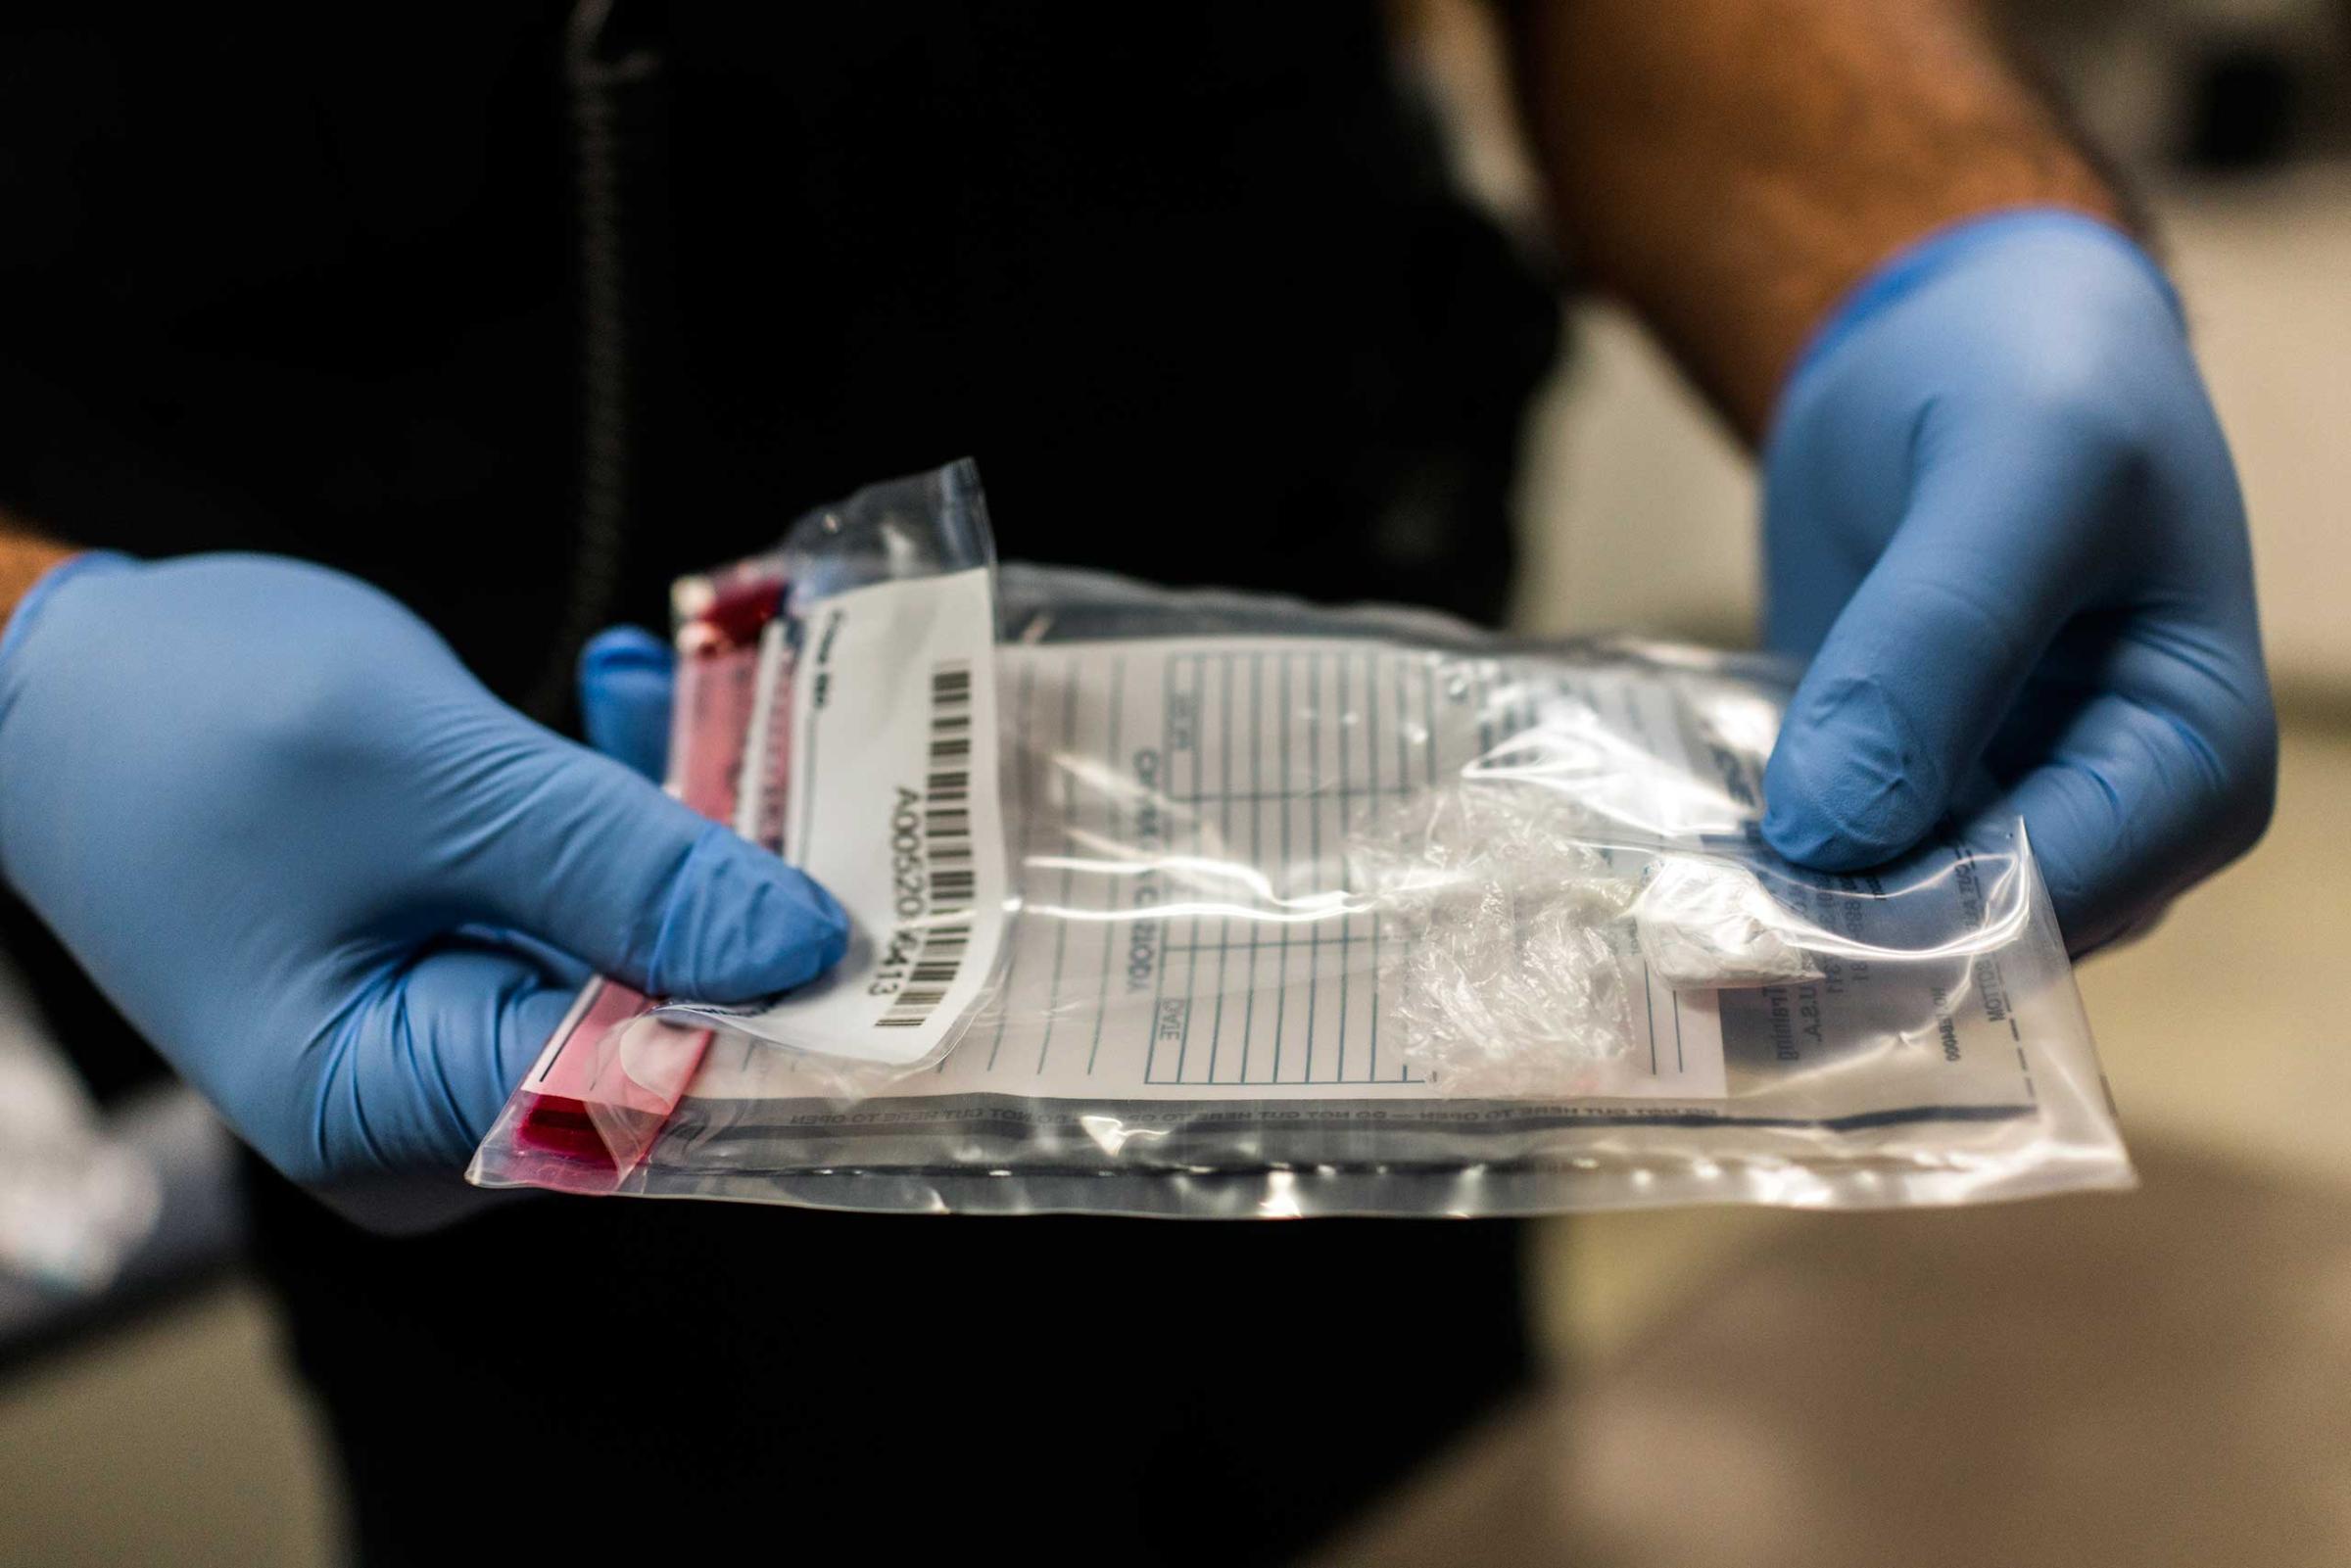 An East Liverpool police officer shows an evidence bag filled with heroin on Oct. 7, 2016. "We can't even touch these things anymore," he said. "These drugs are cut with so much Fentanyl that one touch, one breathe, would kill most men."